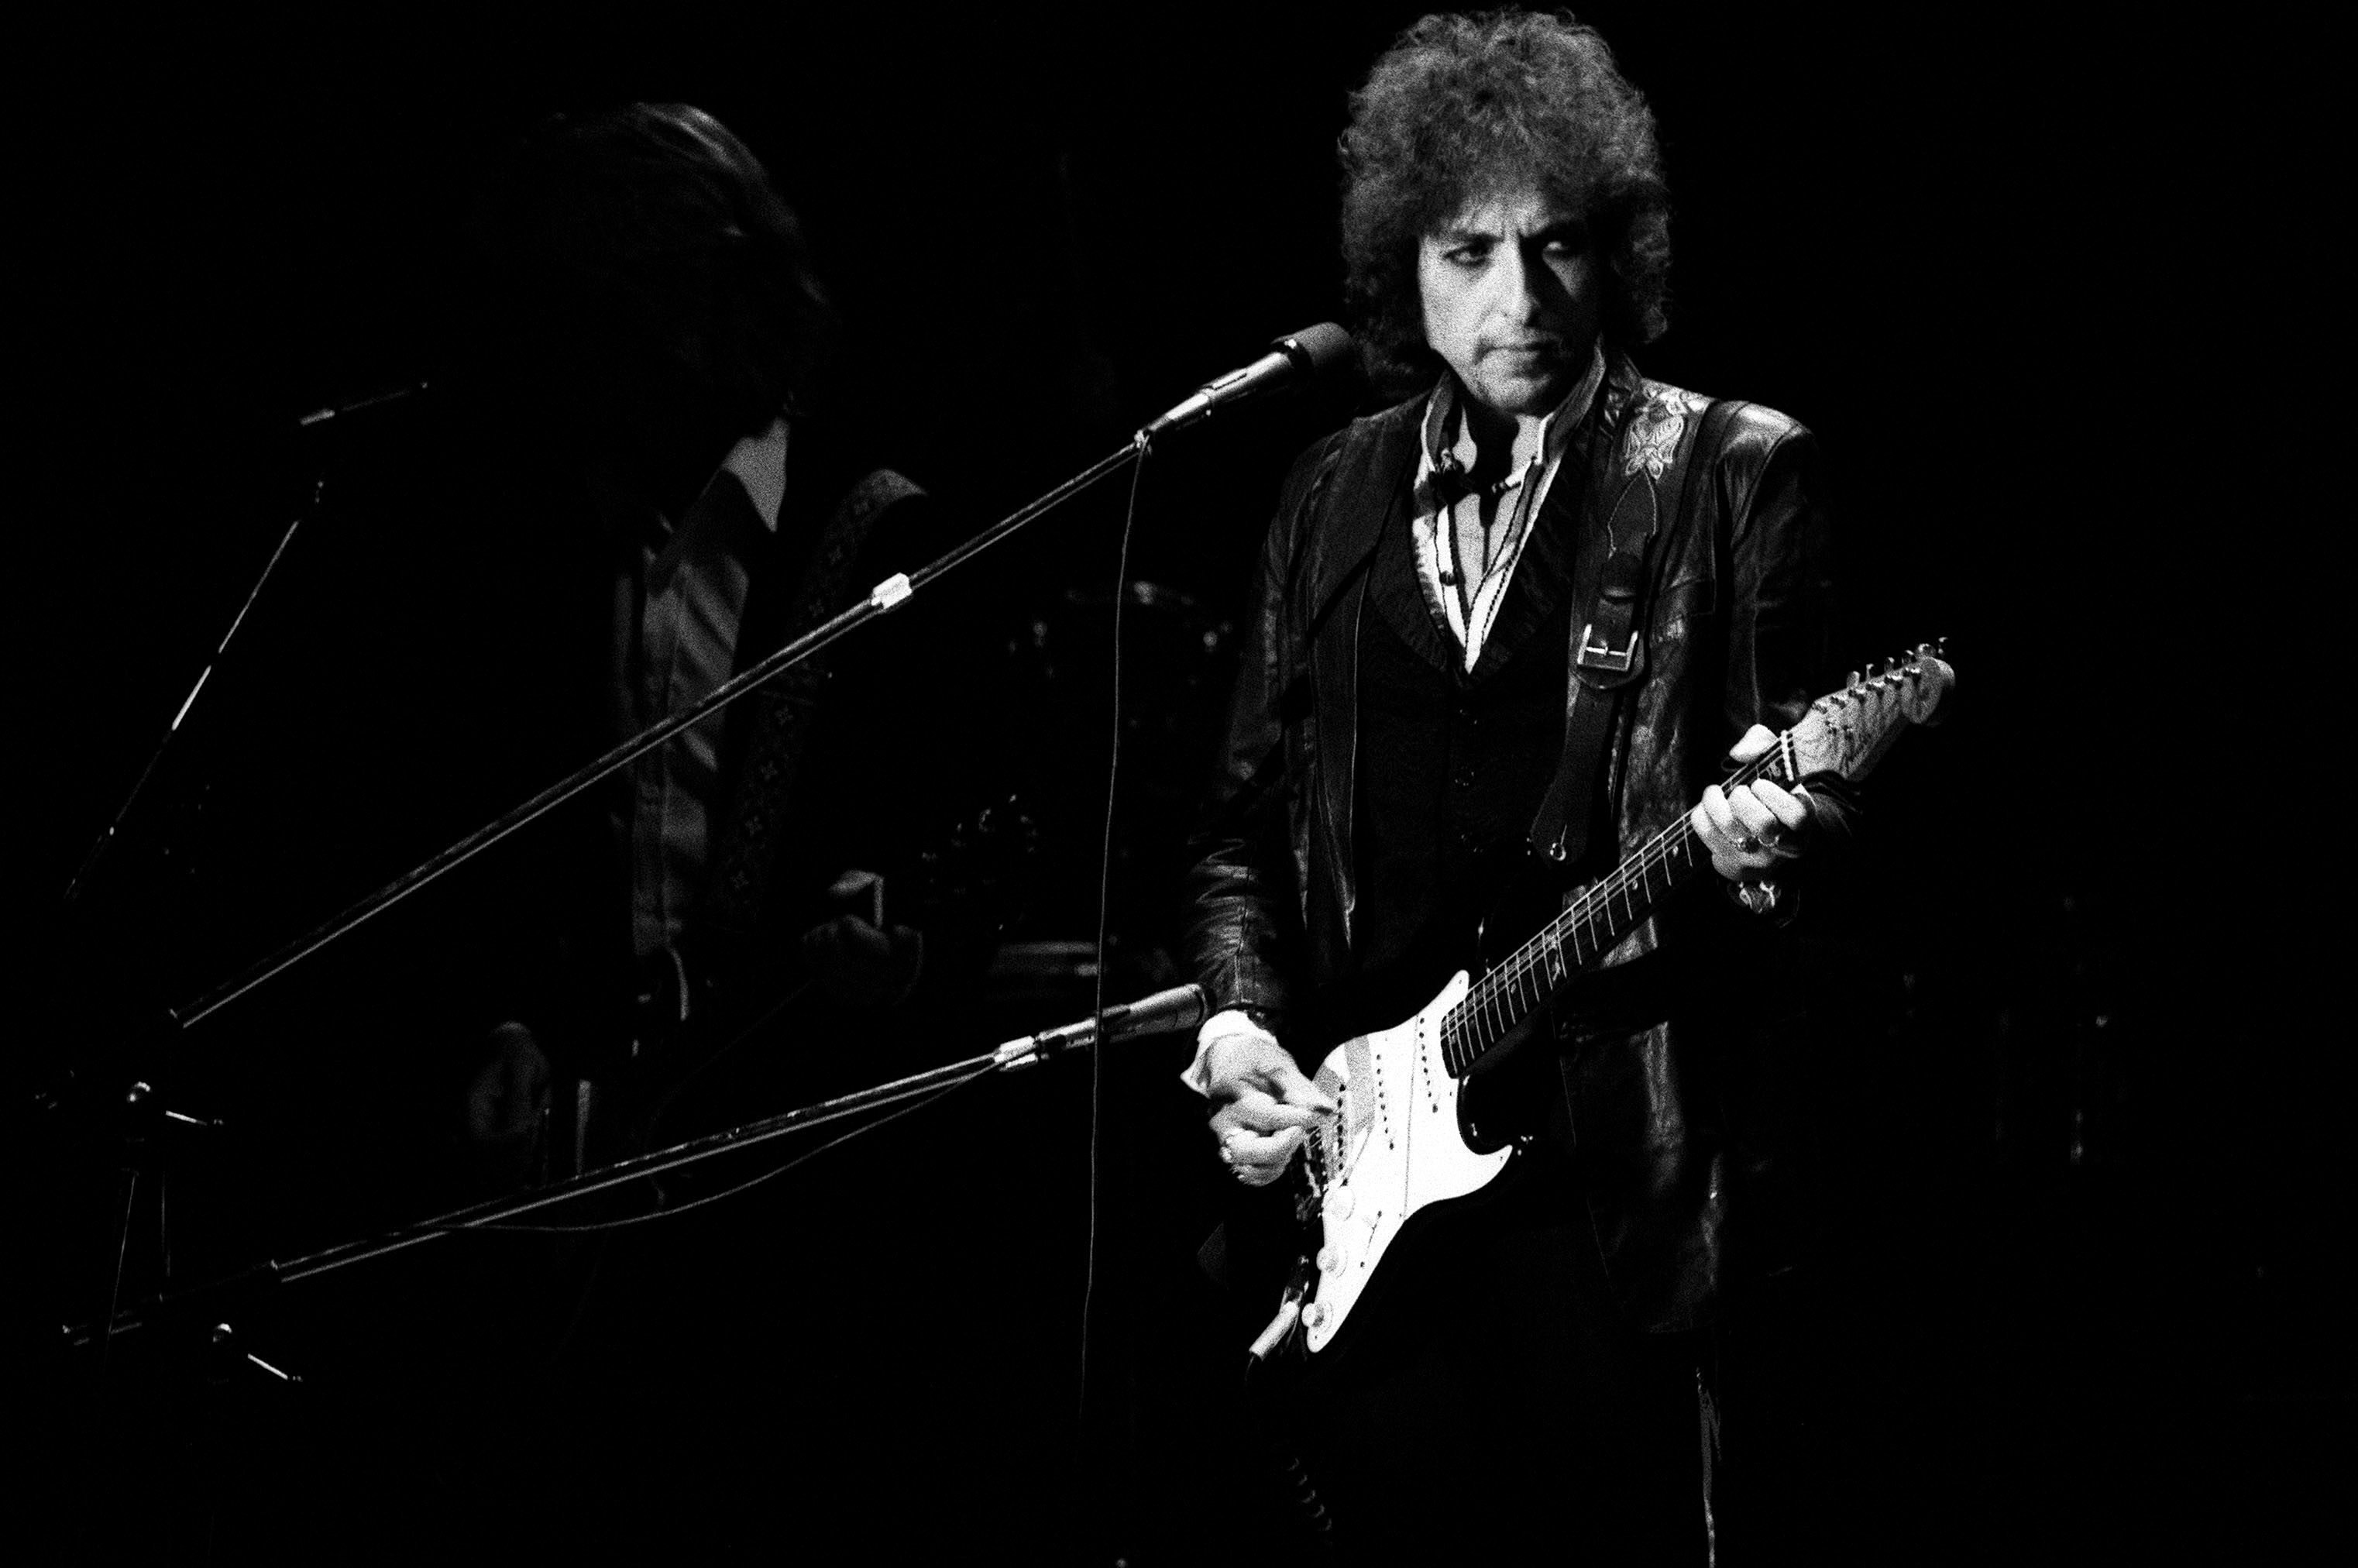 Bob Dylan performing at the Pavilion de Paris in France in 1978